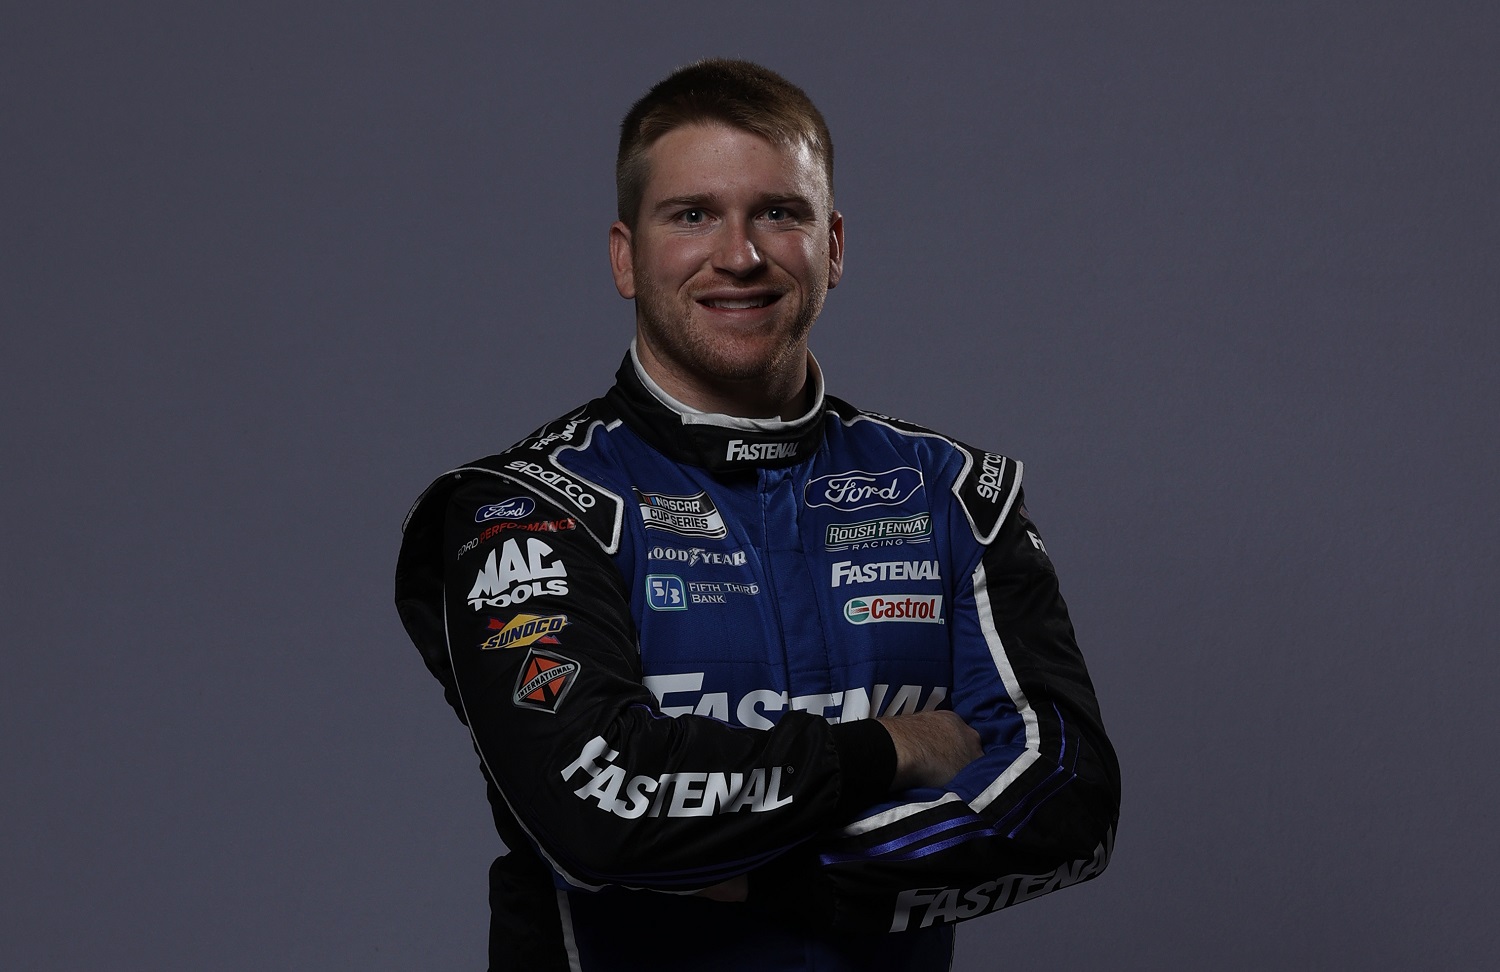 Cup Series driver Chris Buescher poses for a photo during NASCAR Production Days at Fox Sports Studios on Jan. 19, 2021, in Charlotte, North Carolina.